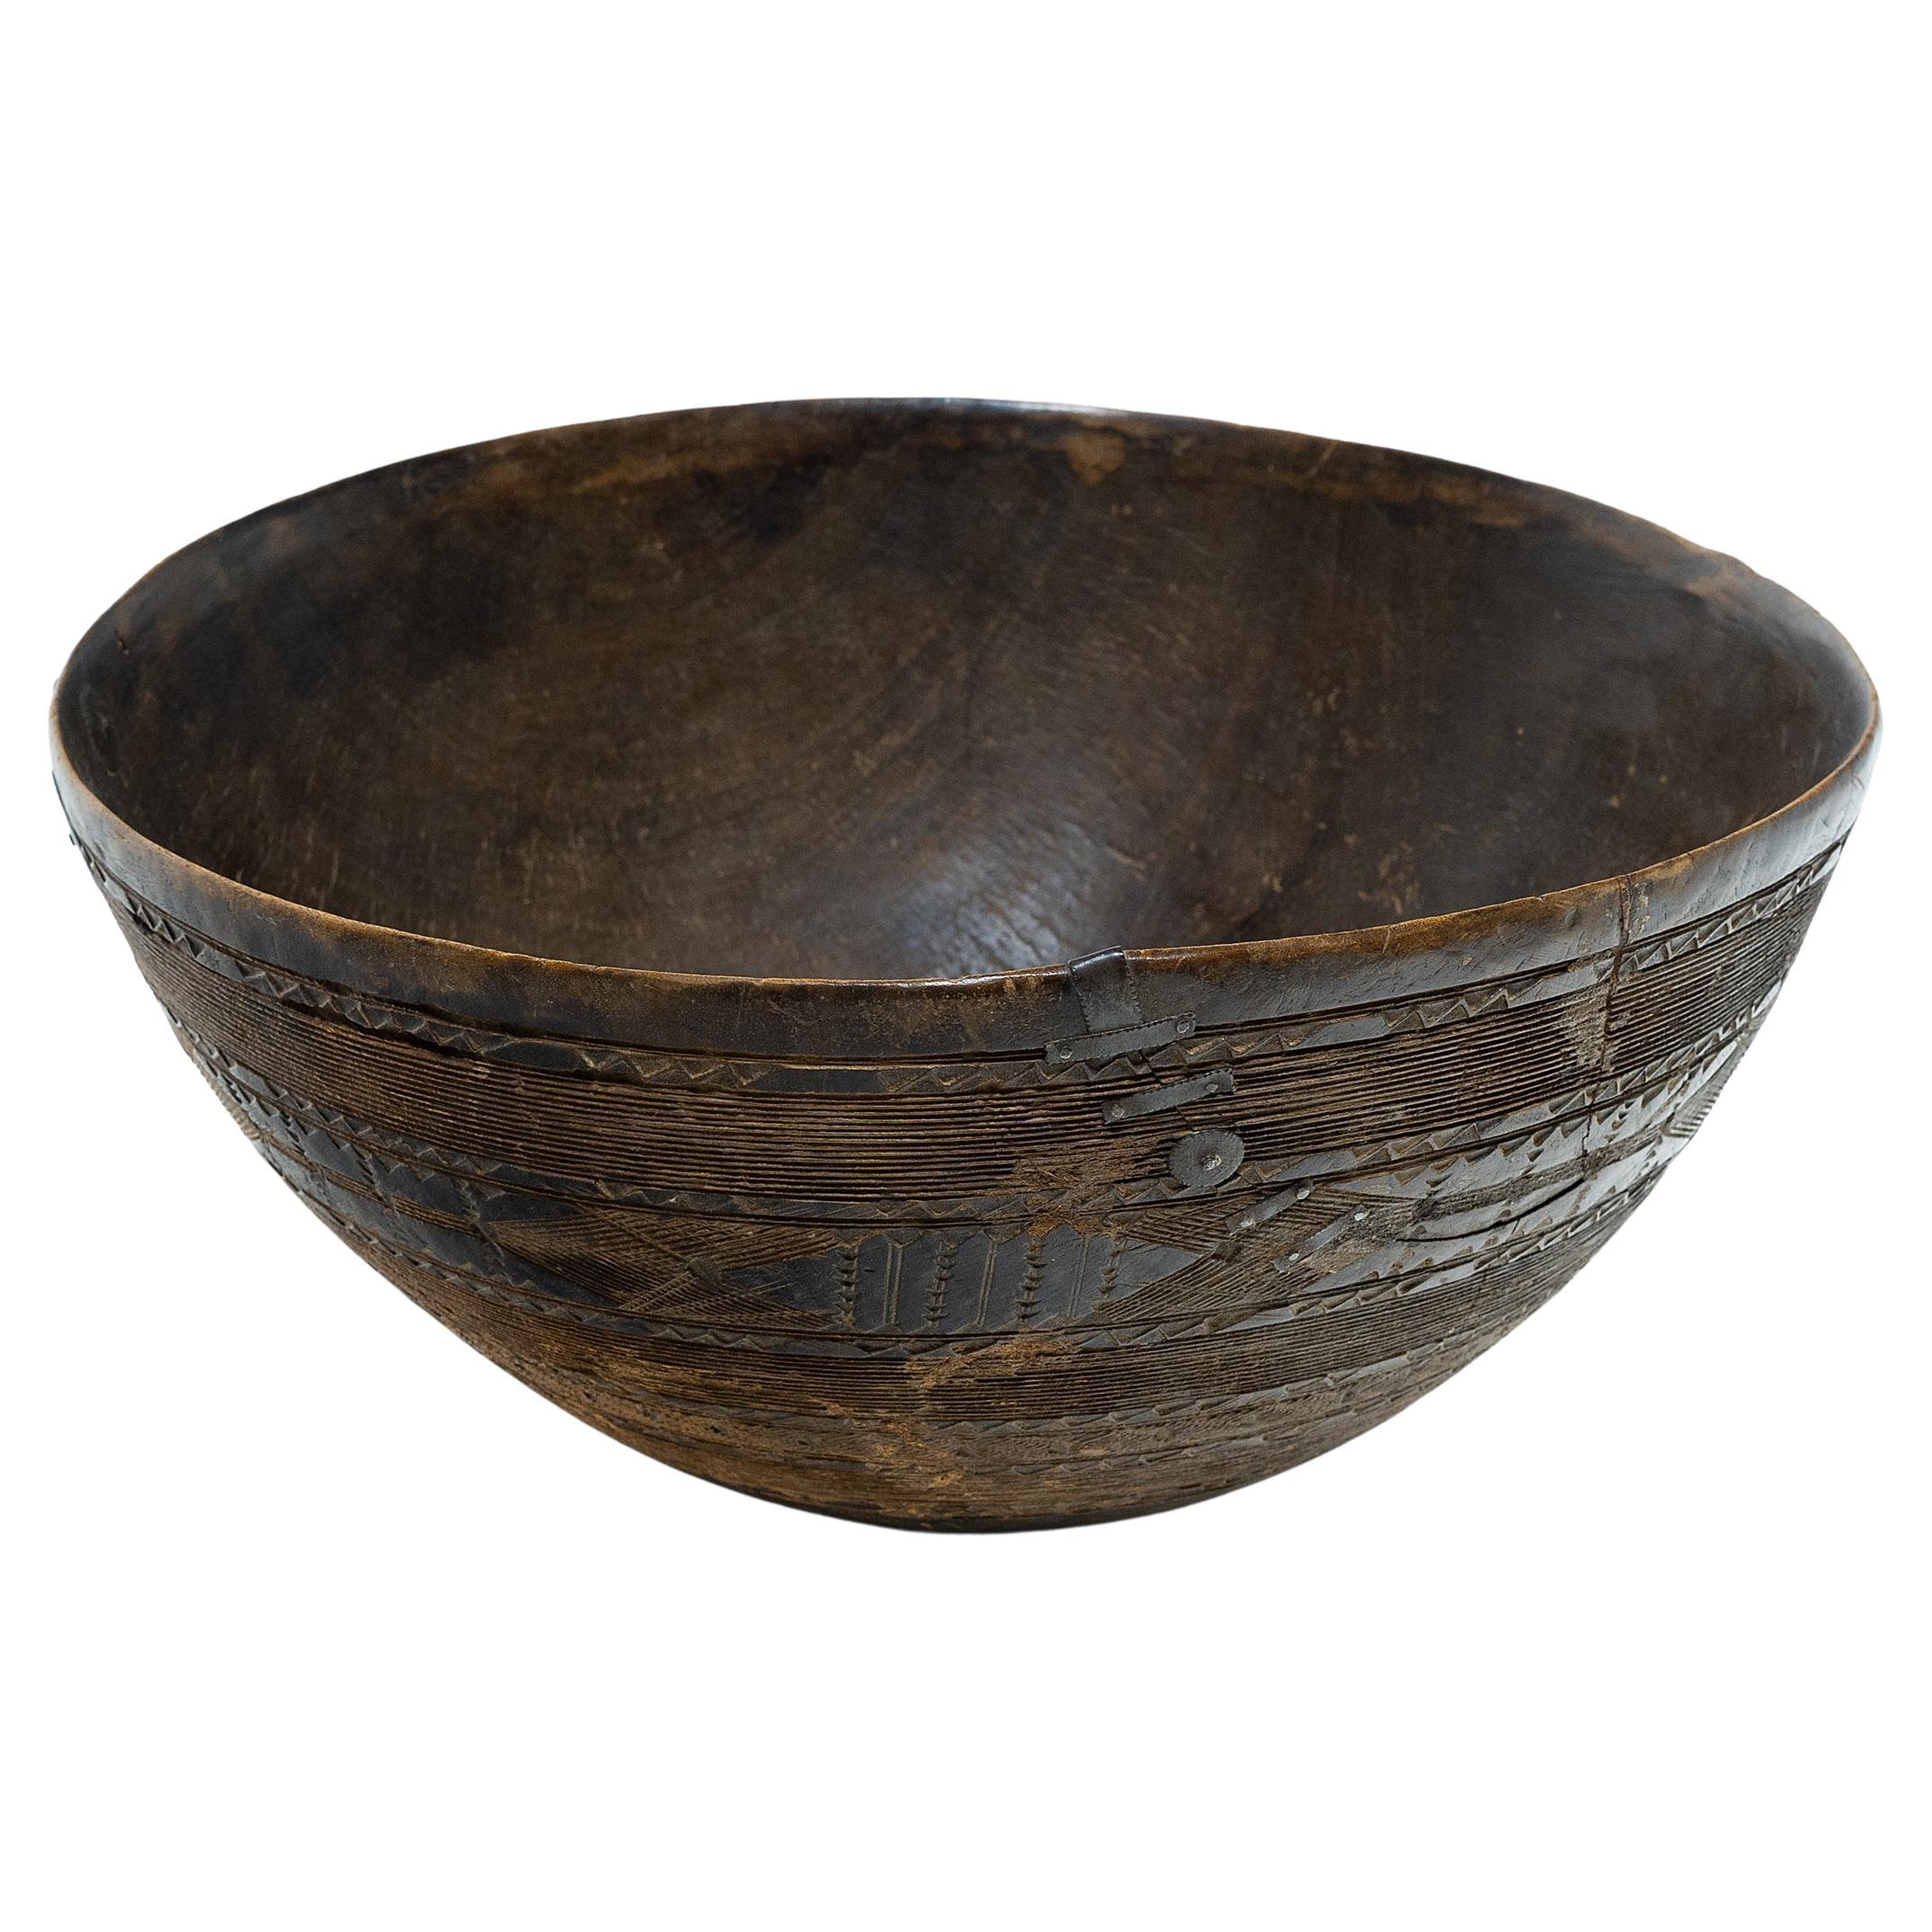 This carefully incised wooden bowl originally belonged to a Fulani family, a Muslim culture scattered throughout West Africa. Because the Fulani are frequently nomadic, they rely on neighboring cultures for the production of many of their objects.